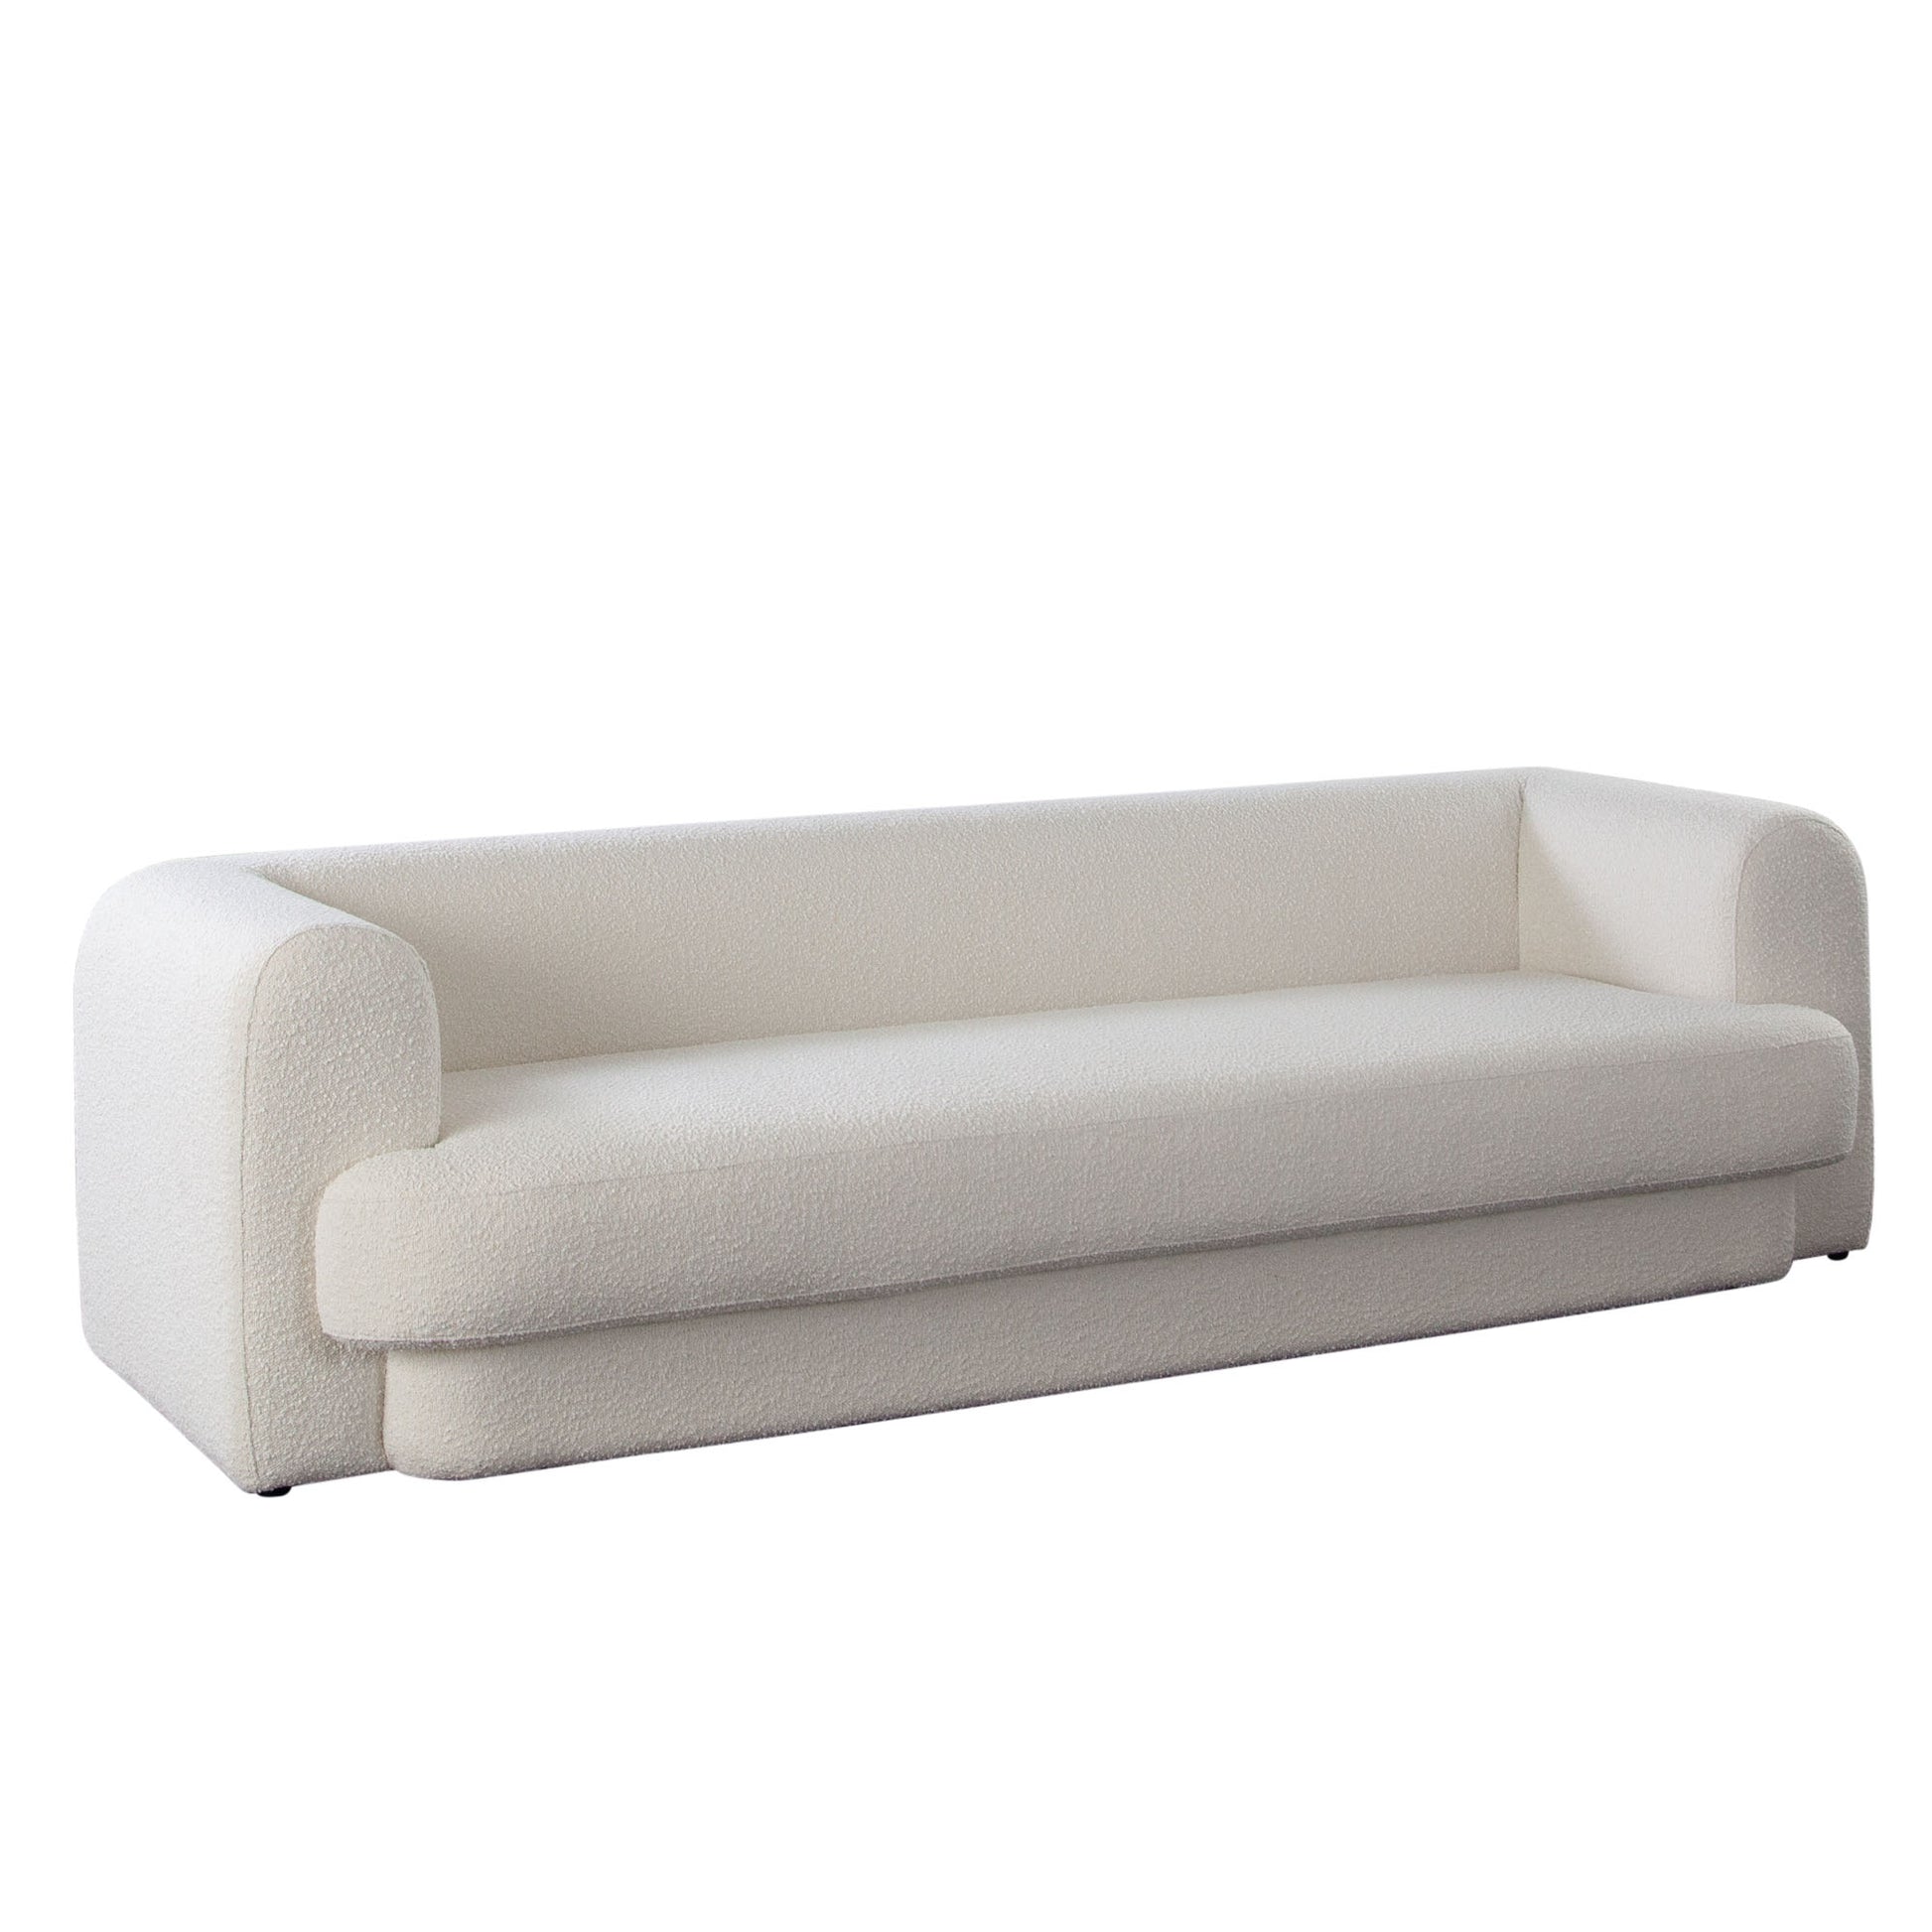 Form Sofa in Ivory Boucle Fabric w/ (2) Accent Pillow Balls - Elite Maison